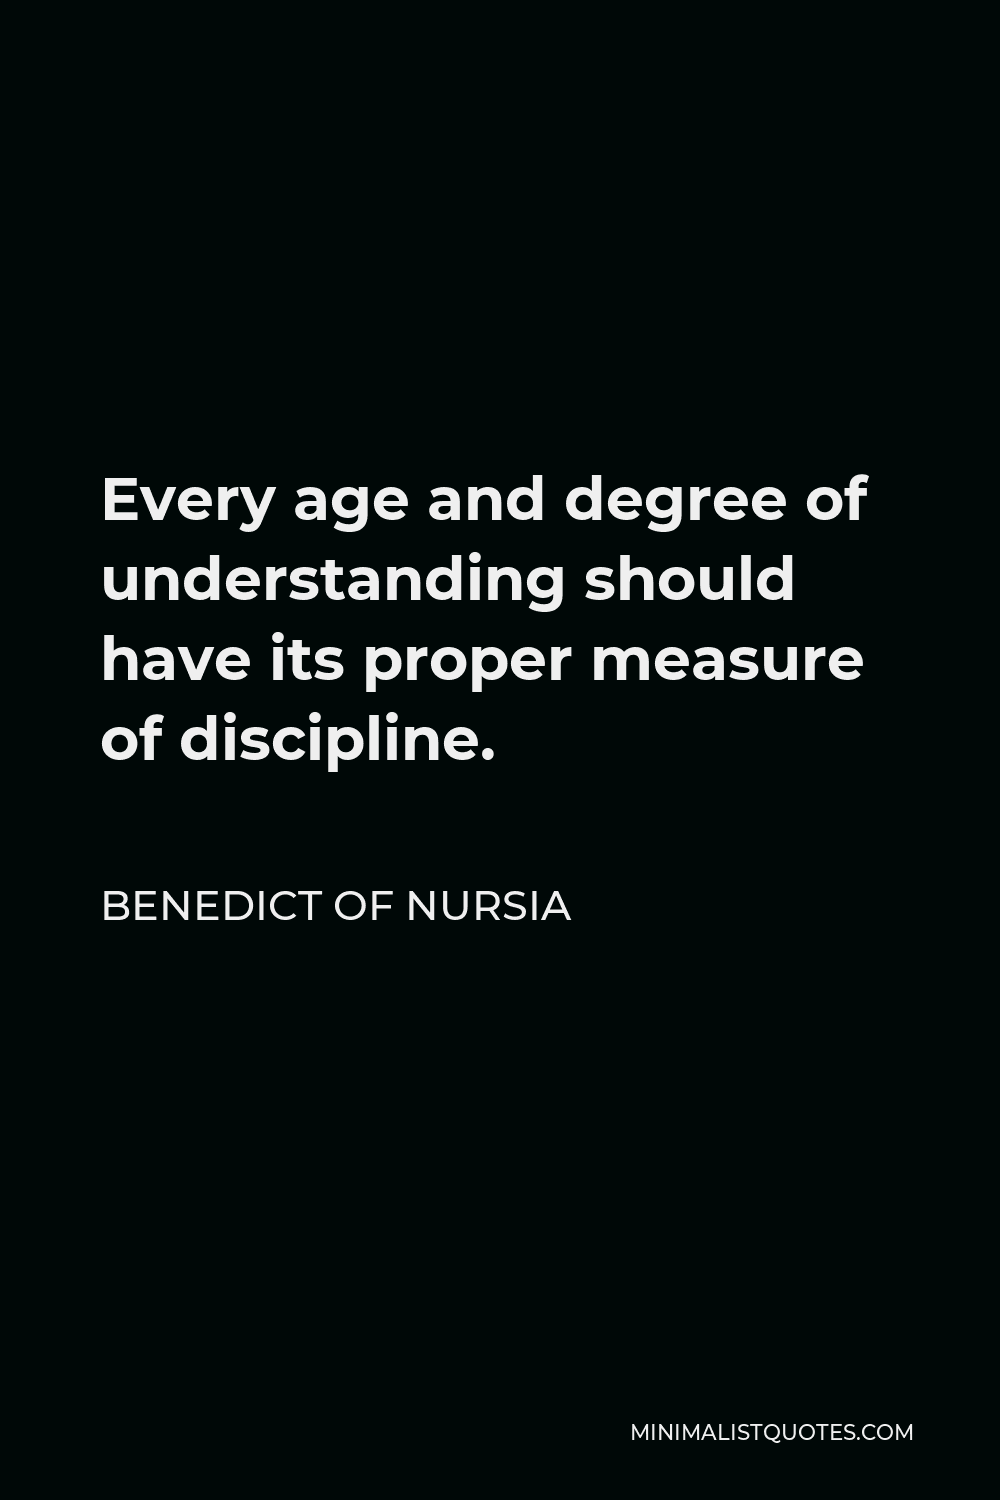 Benedict of Nursia Quote - Every age and degree of understanding should have its proper measure of discipline.